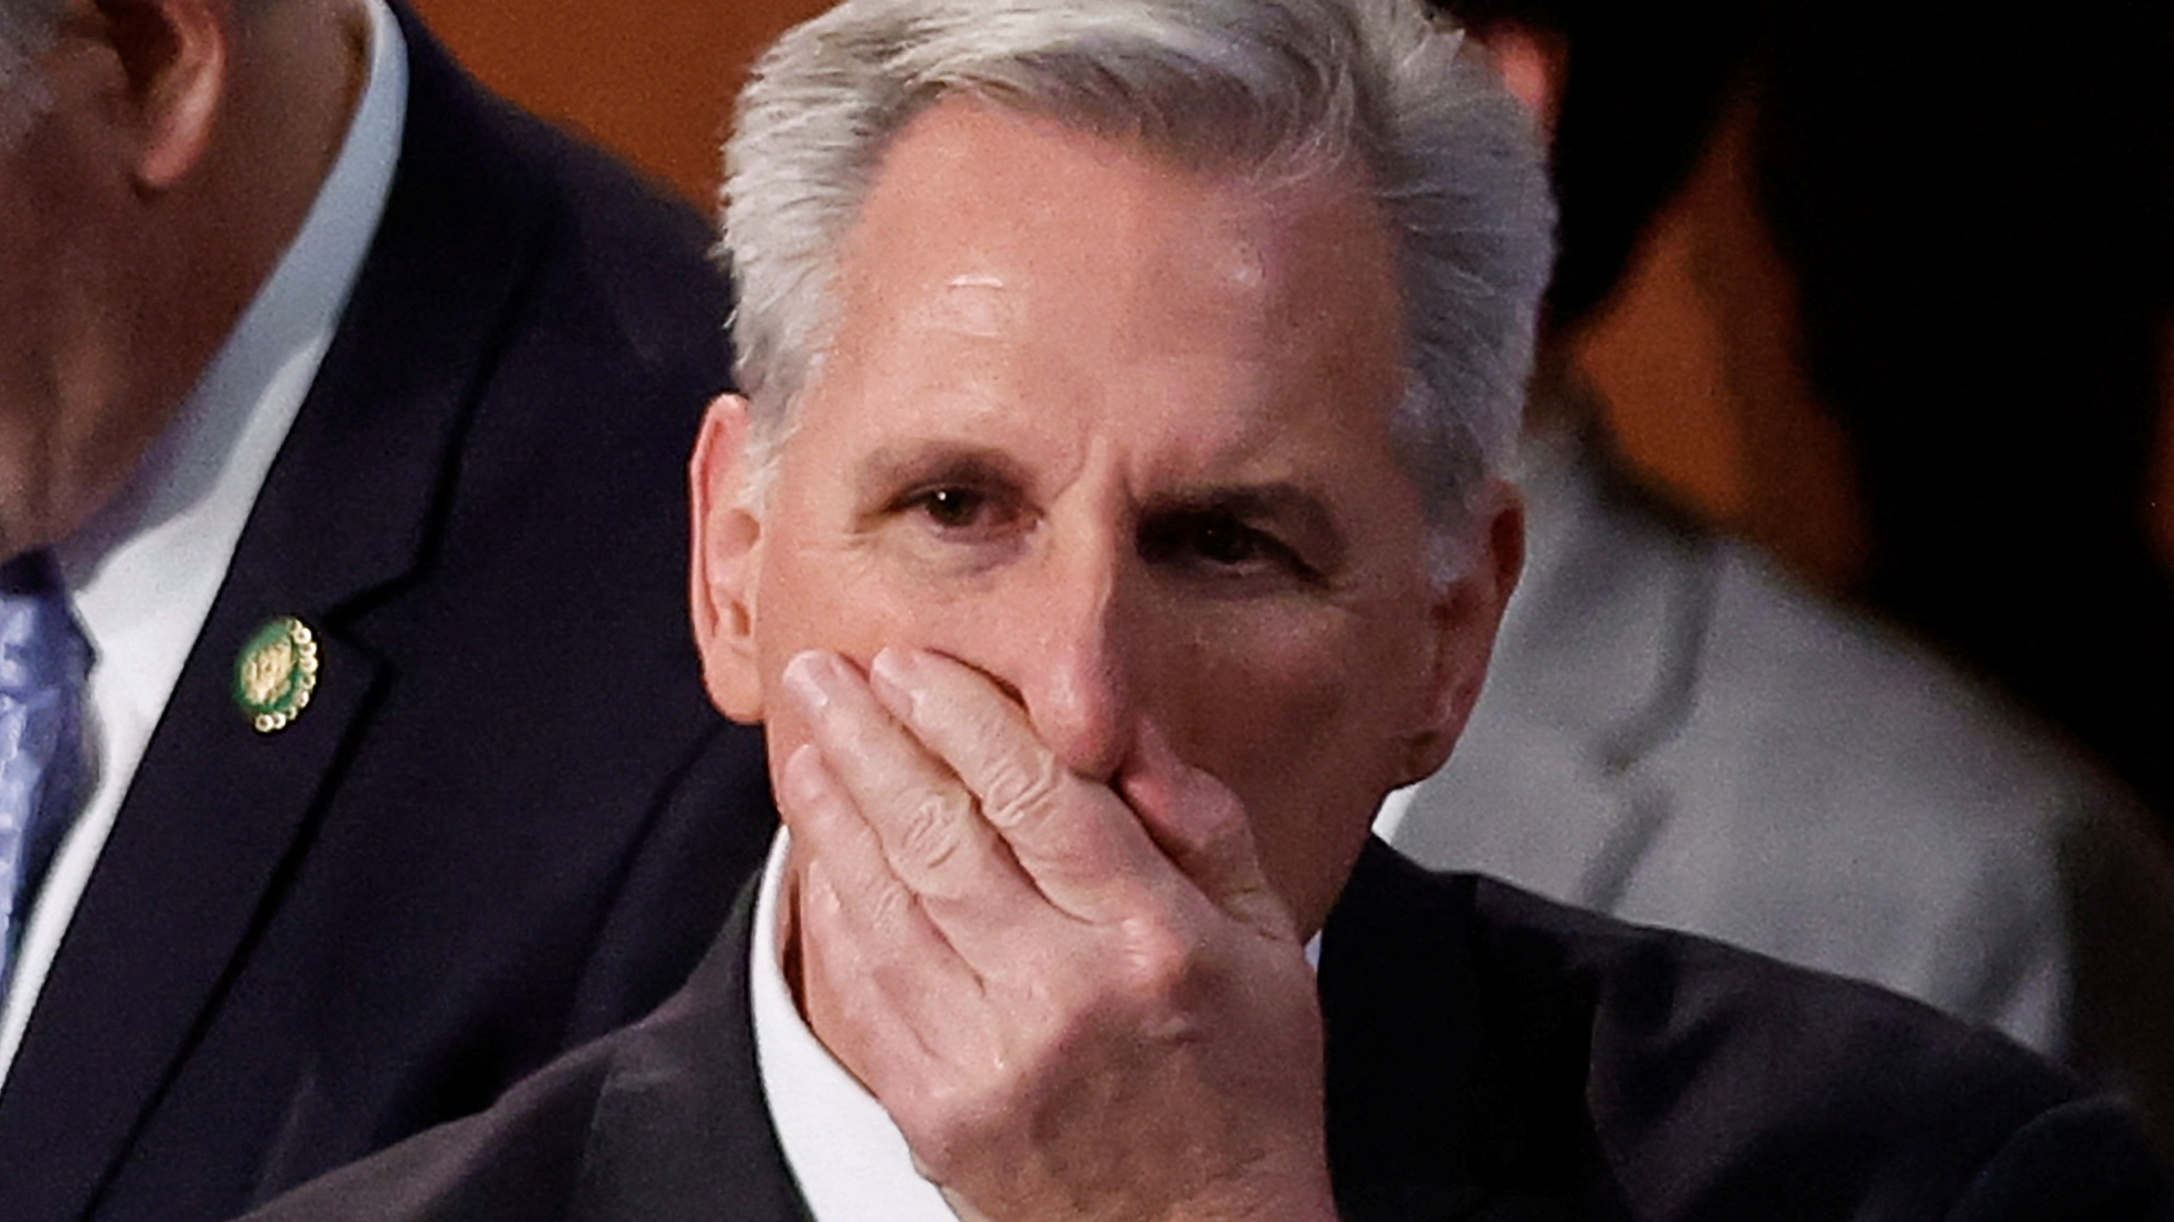 House Republican leader Kevin McCarthy stands inside the House Chamber during voting for a new Speaker on the third day of the 118th Congress at the U.S. Capitol in Washington, U.S., January 5, 2023. /Reuters